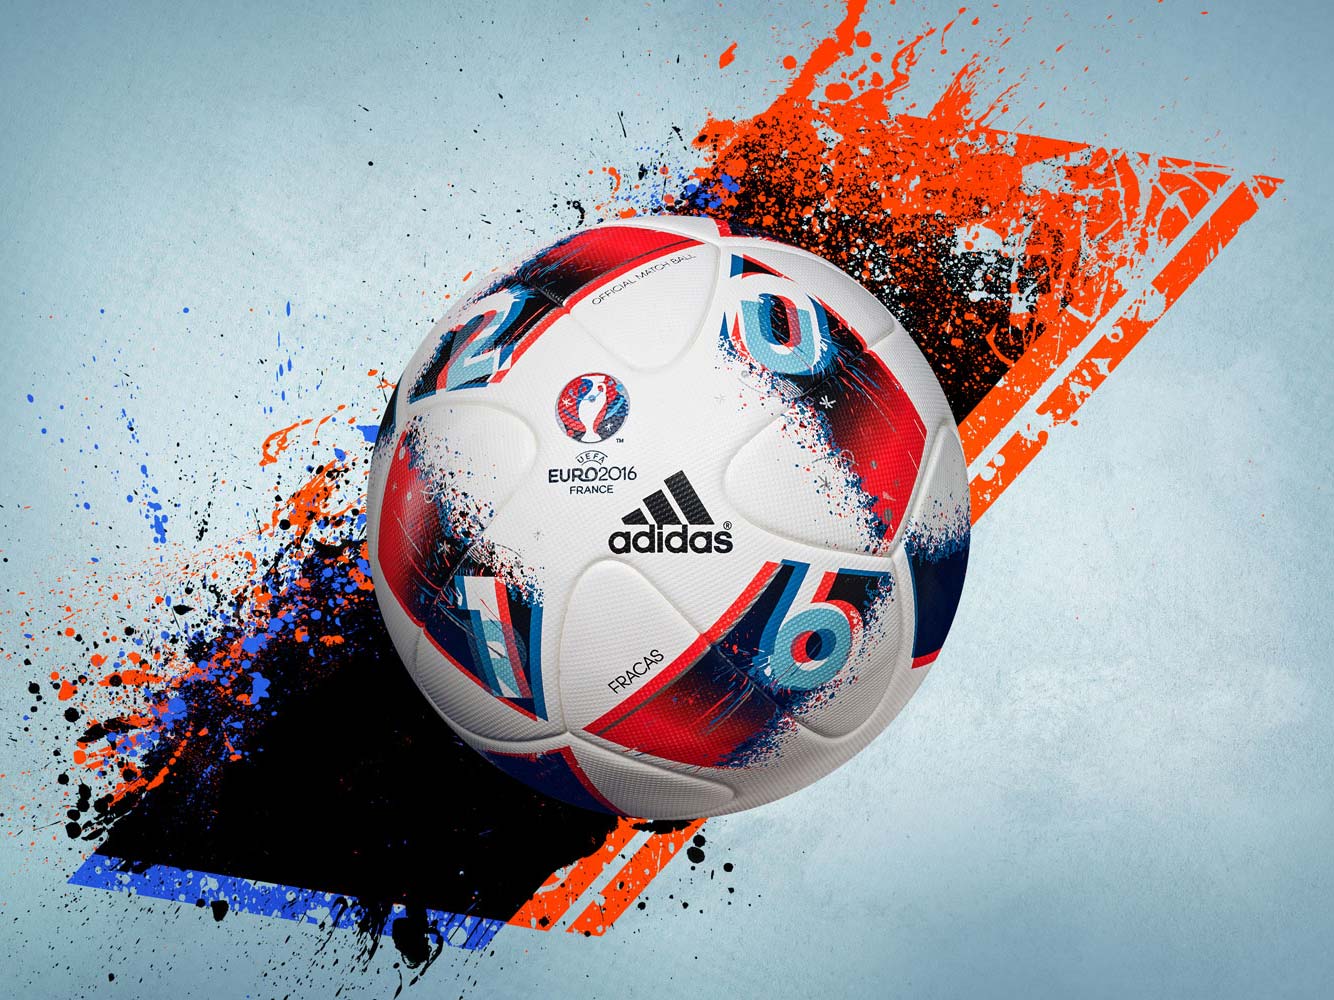 Adidas 2016 Ball Released - Footy